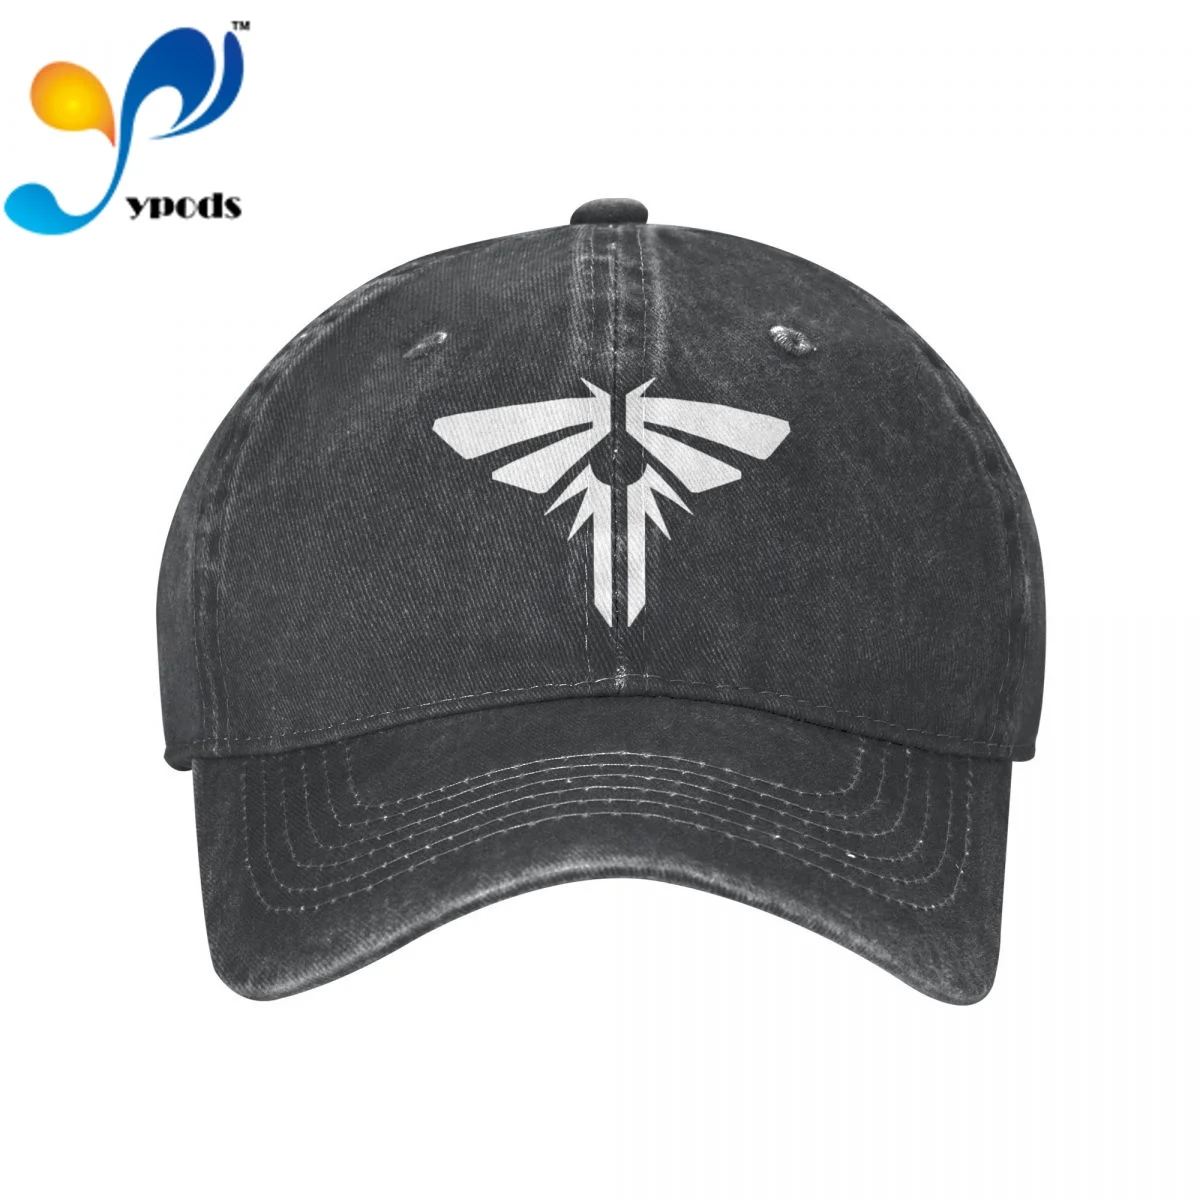 

The Last Of Us Part II Firefly Light Eroded Cotton Cap For Men Women Gorras Snapback Caps Baseball Caps Casquette Dad Hat